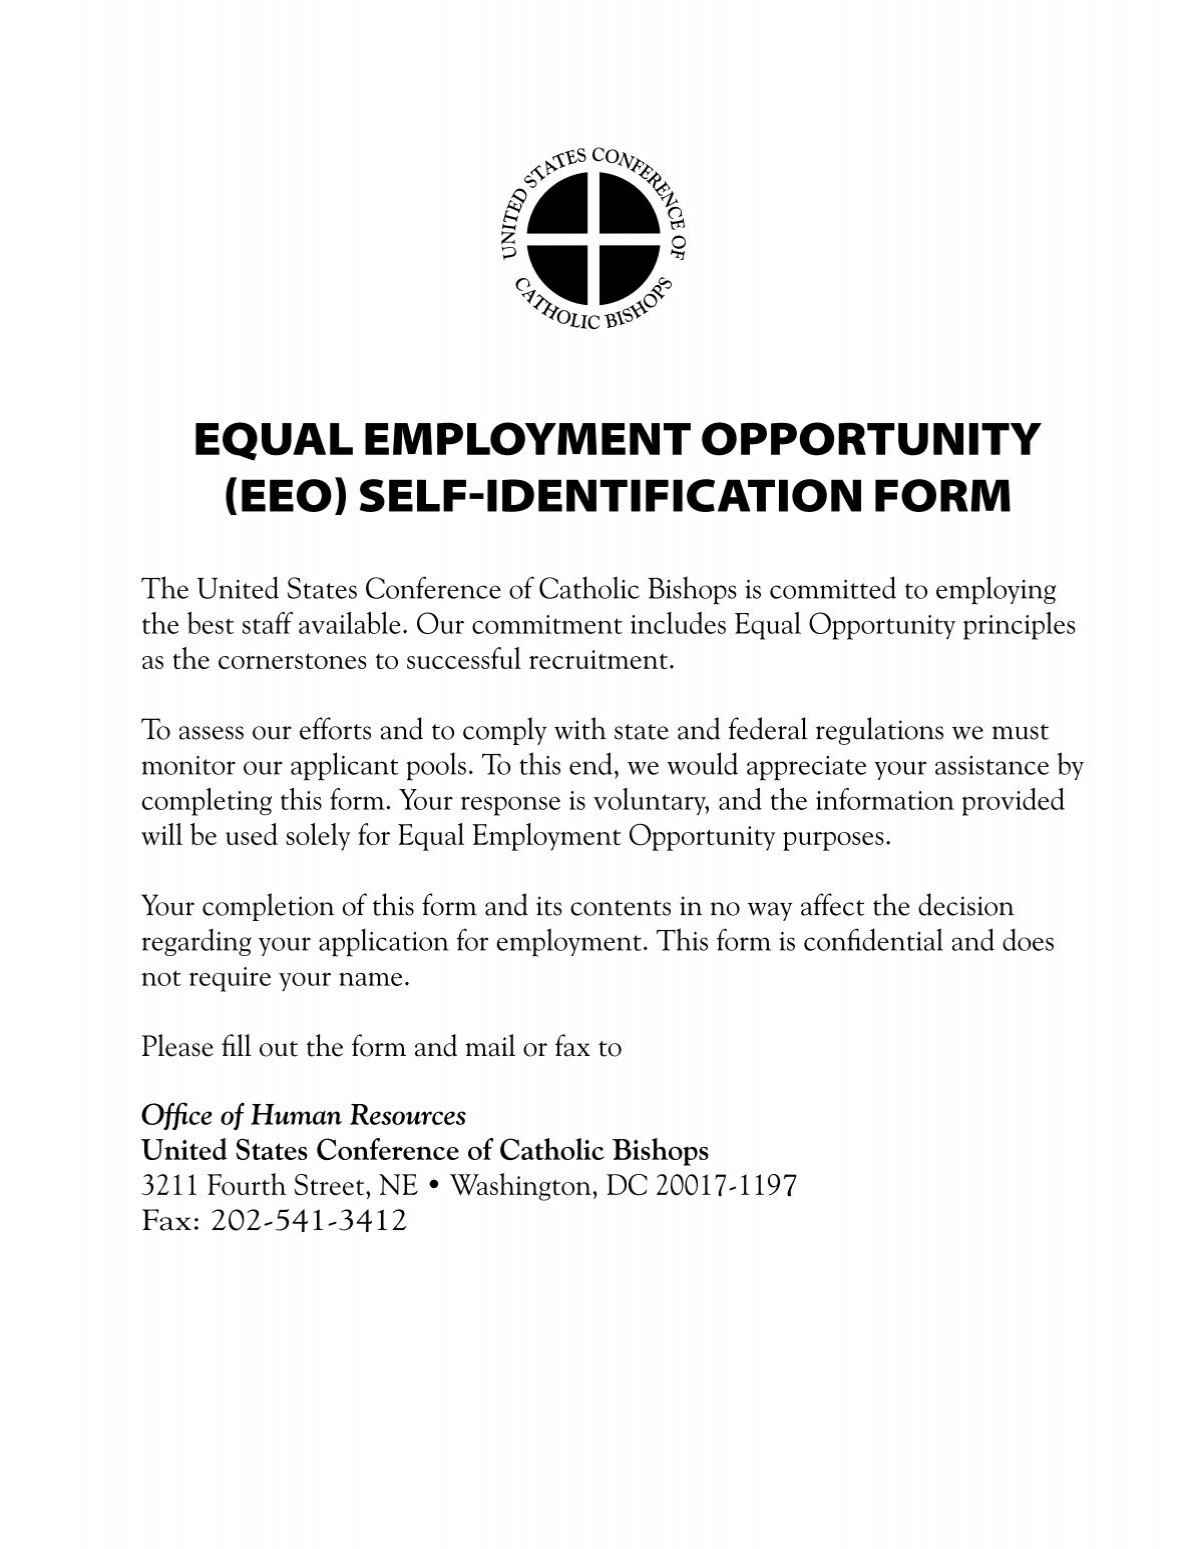 equal-employment-opportunity-eeo-self-identification-form